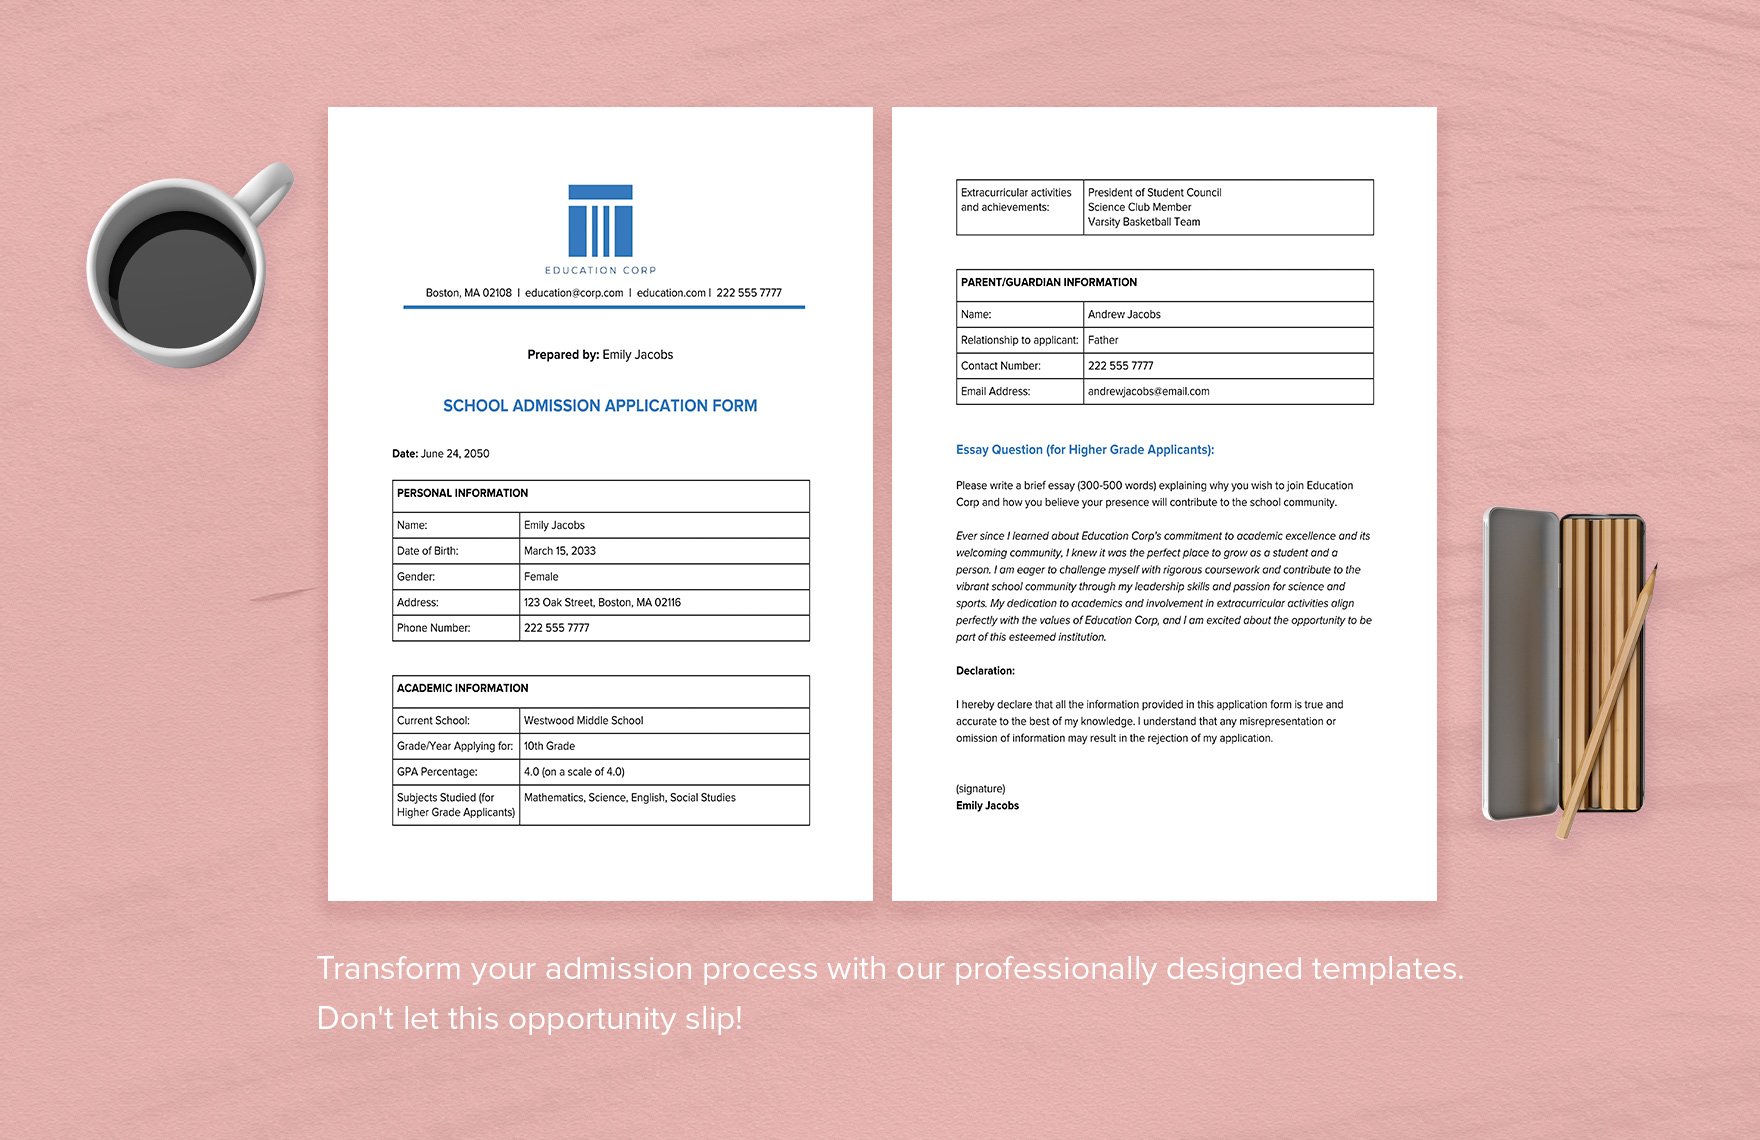 School Admission Application Form Template